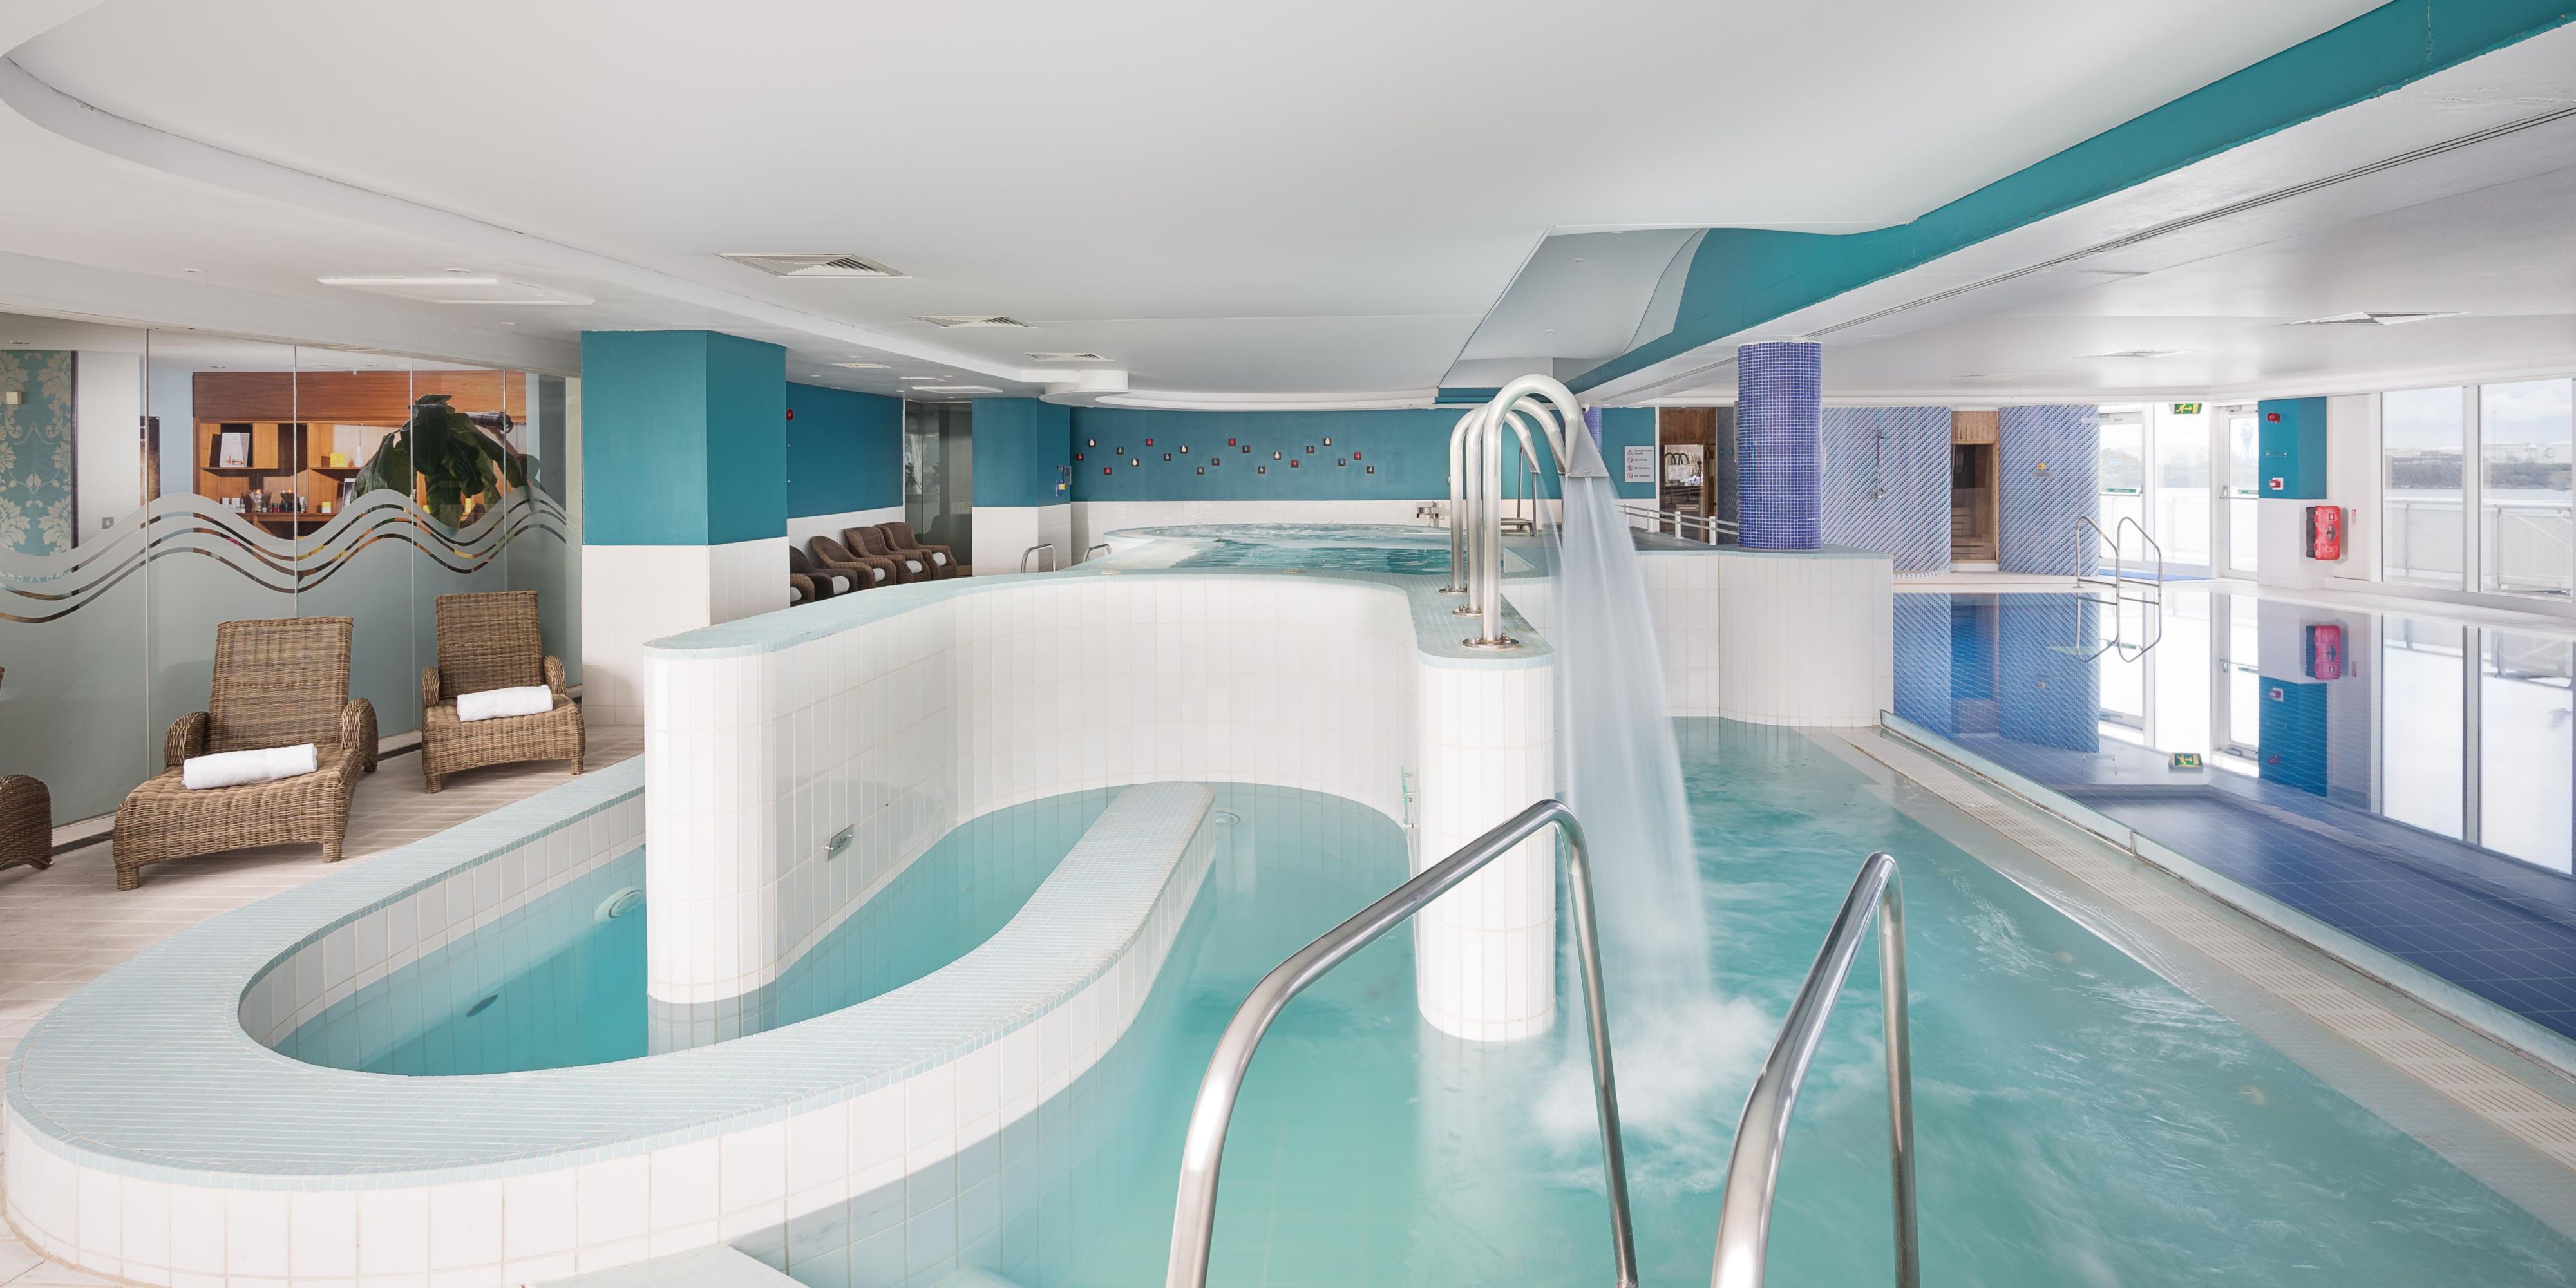 Regularly ranked amongst the top five spas in the UK by Condé Nast Traveller, indulge in a little spa therapy right on the edge of Cardiff’s trendy waterfront.